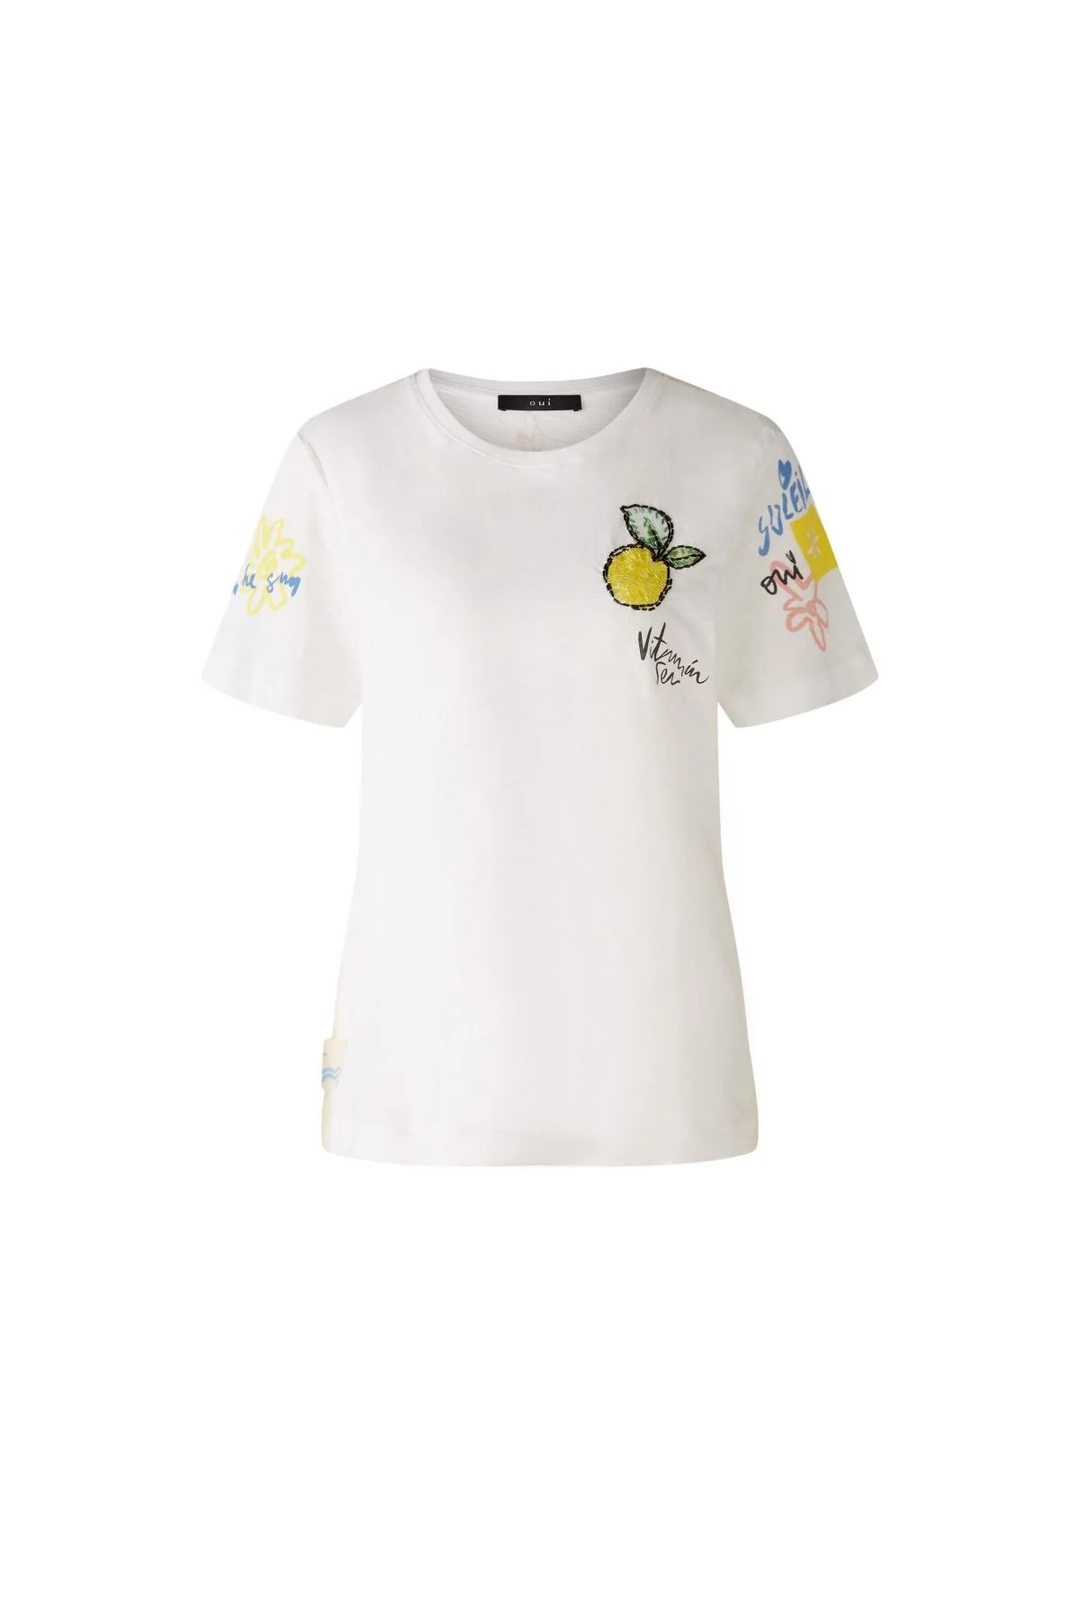 Printed and embroidered T-shirts